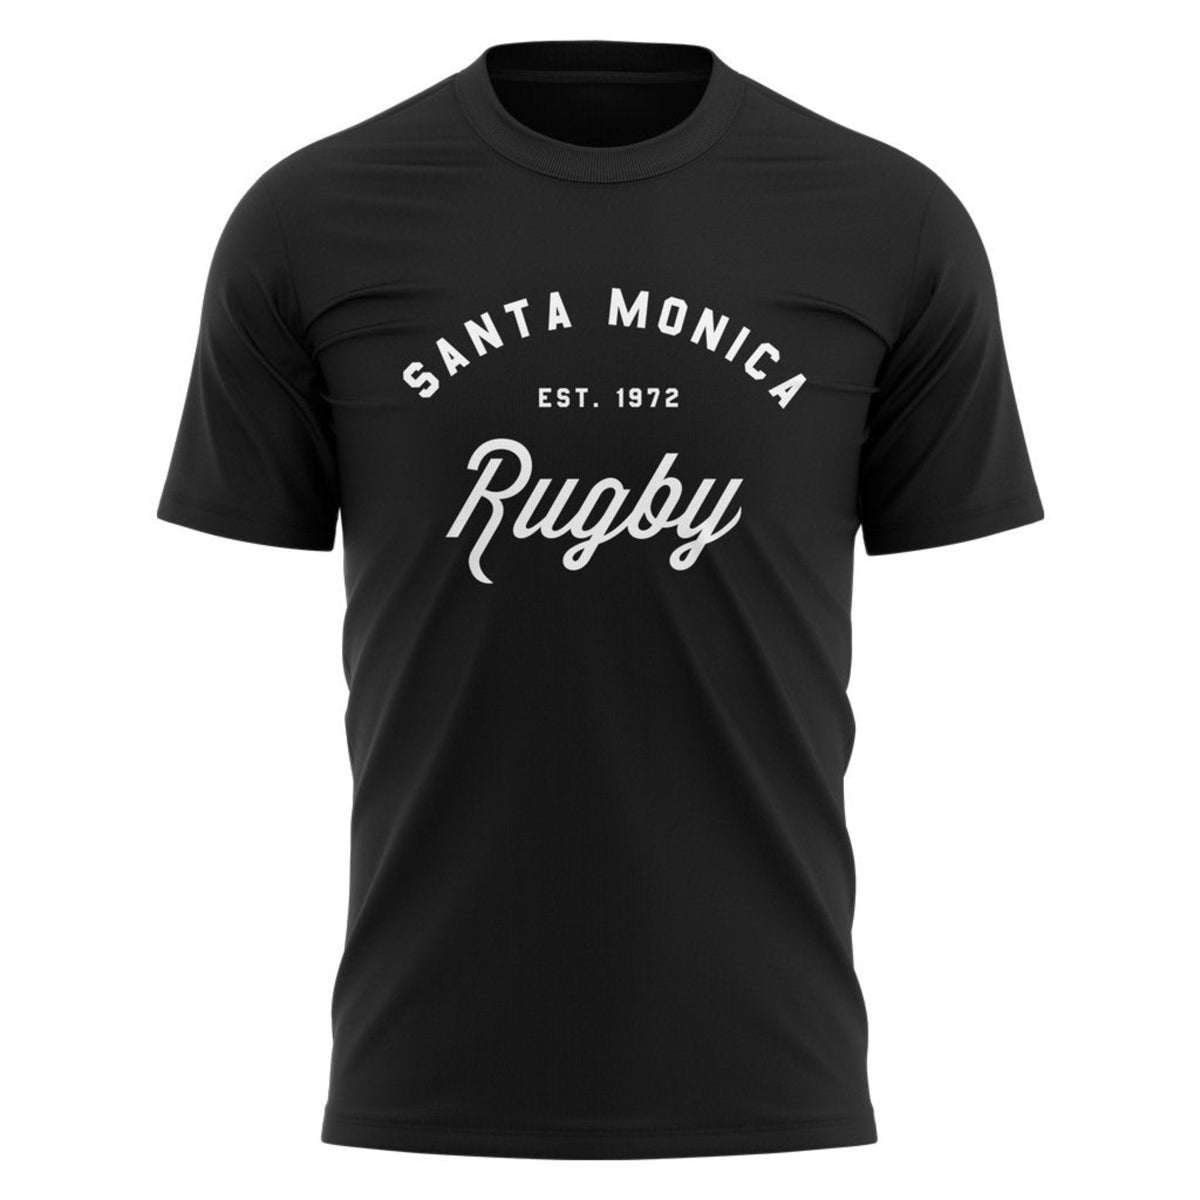 Santa Monica Rugby Club &quot;Classic&quot; Tee - Youth Black Or Grey - www.therugbyshop.com www.therugbyshop.com YOUTH / BLACK / S XIX Brands TEES Santa Monica Rugby Club &quot;Classic&quot; Tee - Youth Black Or Grey